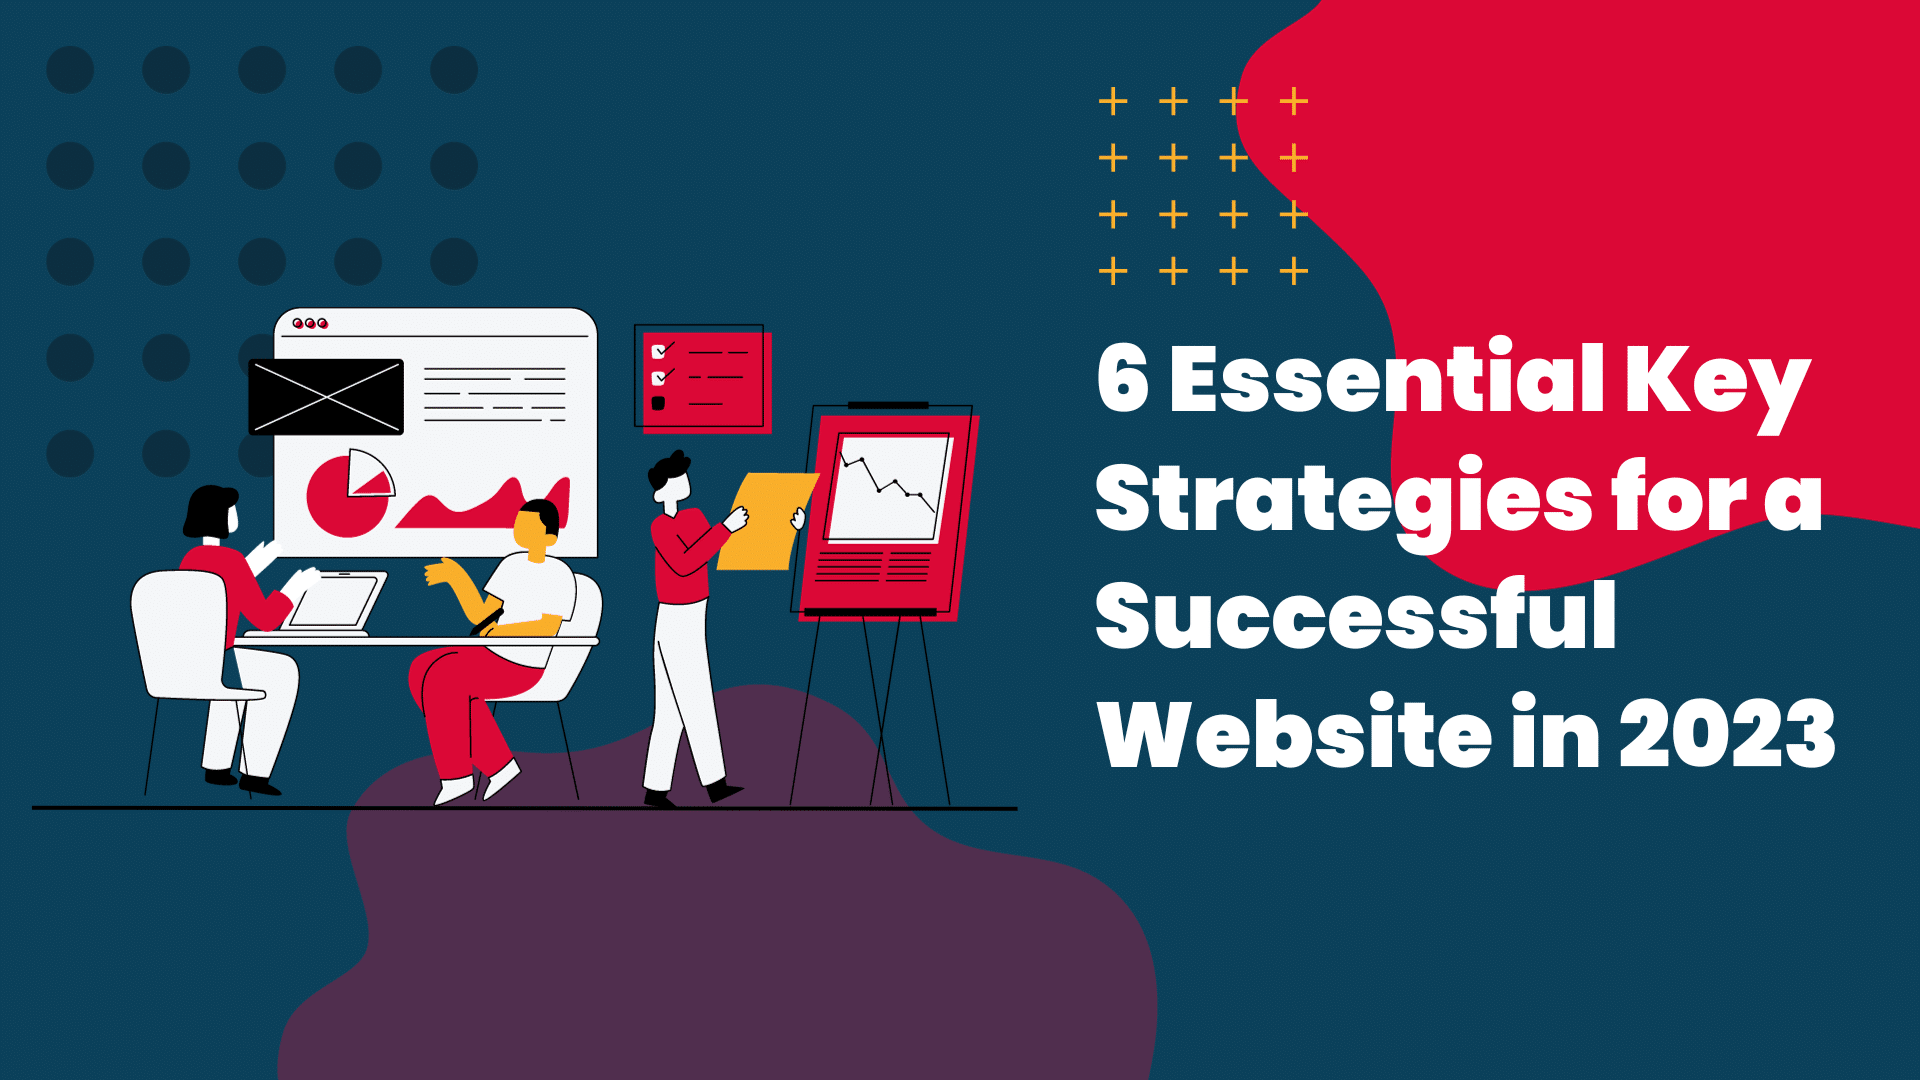 The image shows a stylized illustration with three people working on website strategies, featuring graphs, charts, and text stating "6 Essential Key Strategies for a Successful Website in 2023".